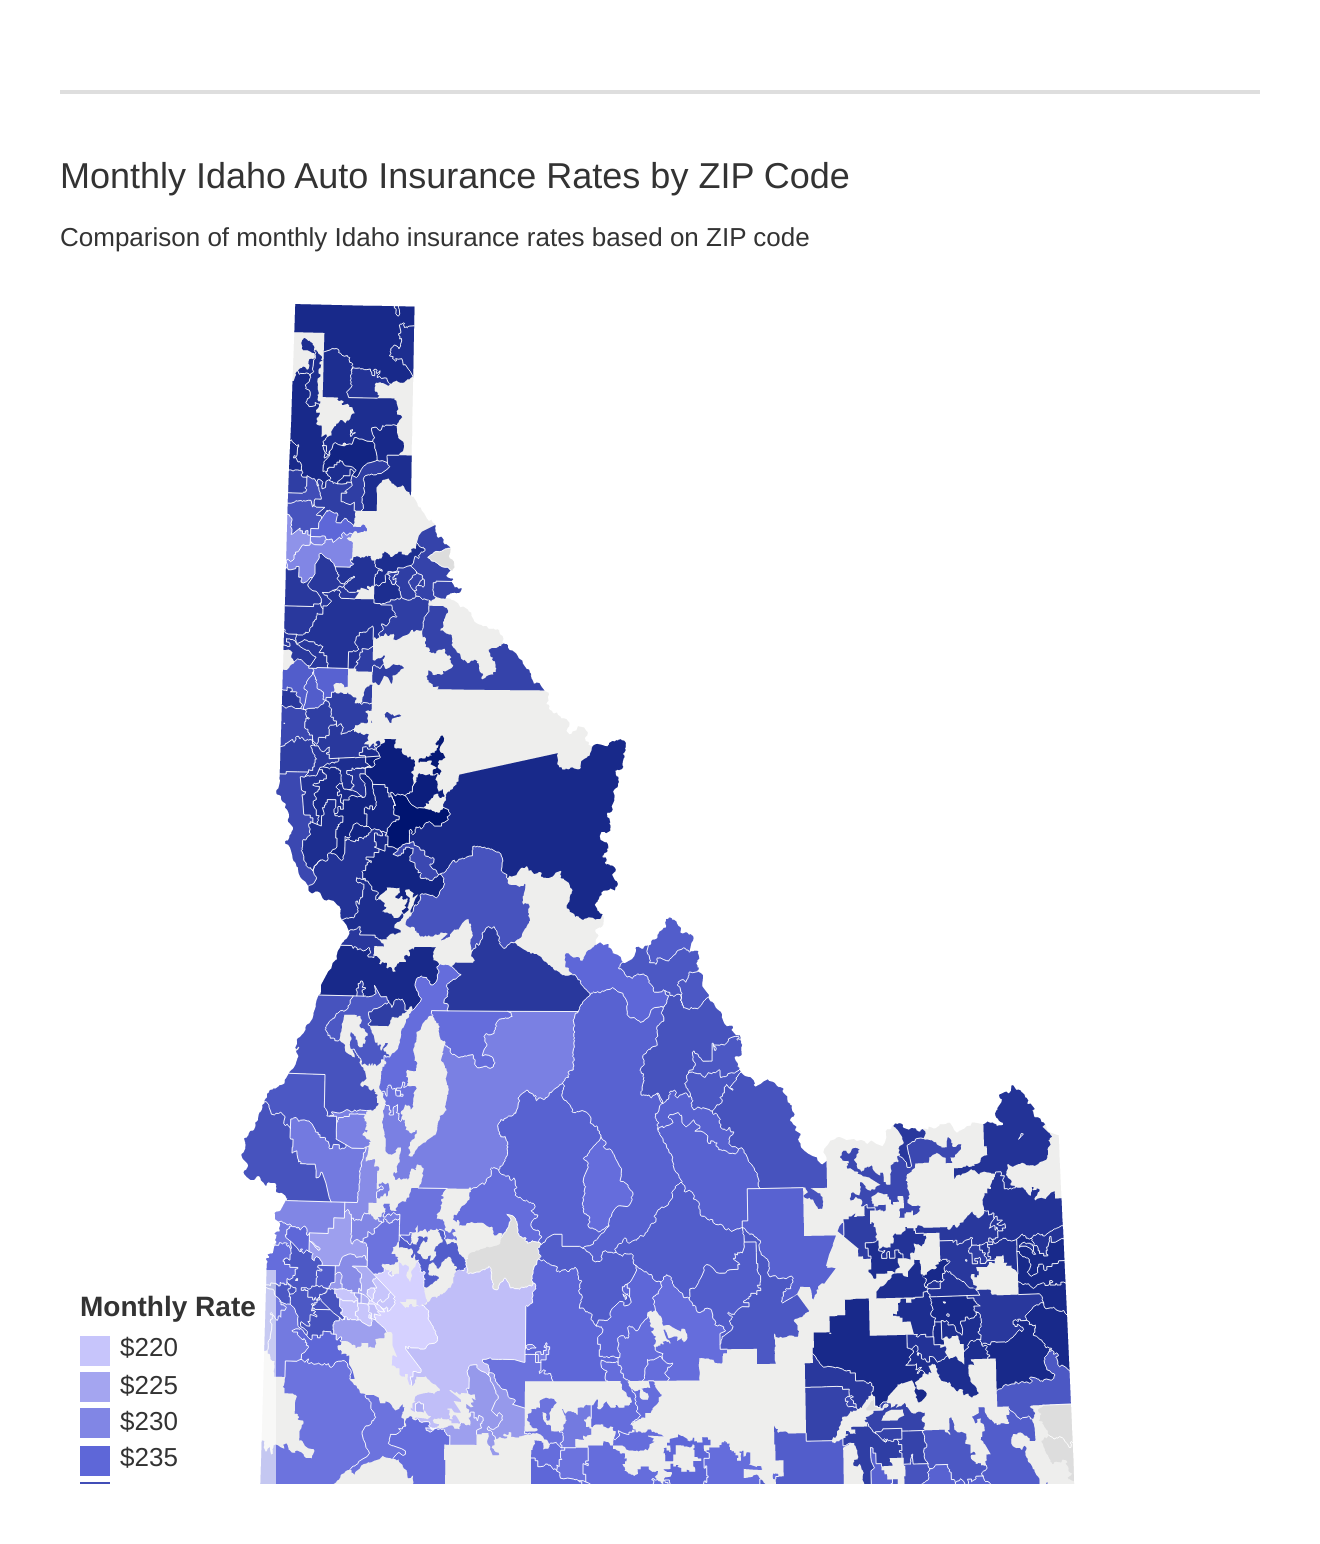 Monthly Idaho Auto Insurance Rates by ZIP Code